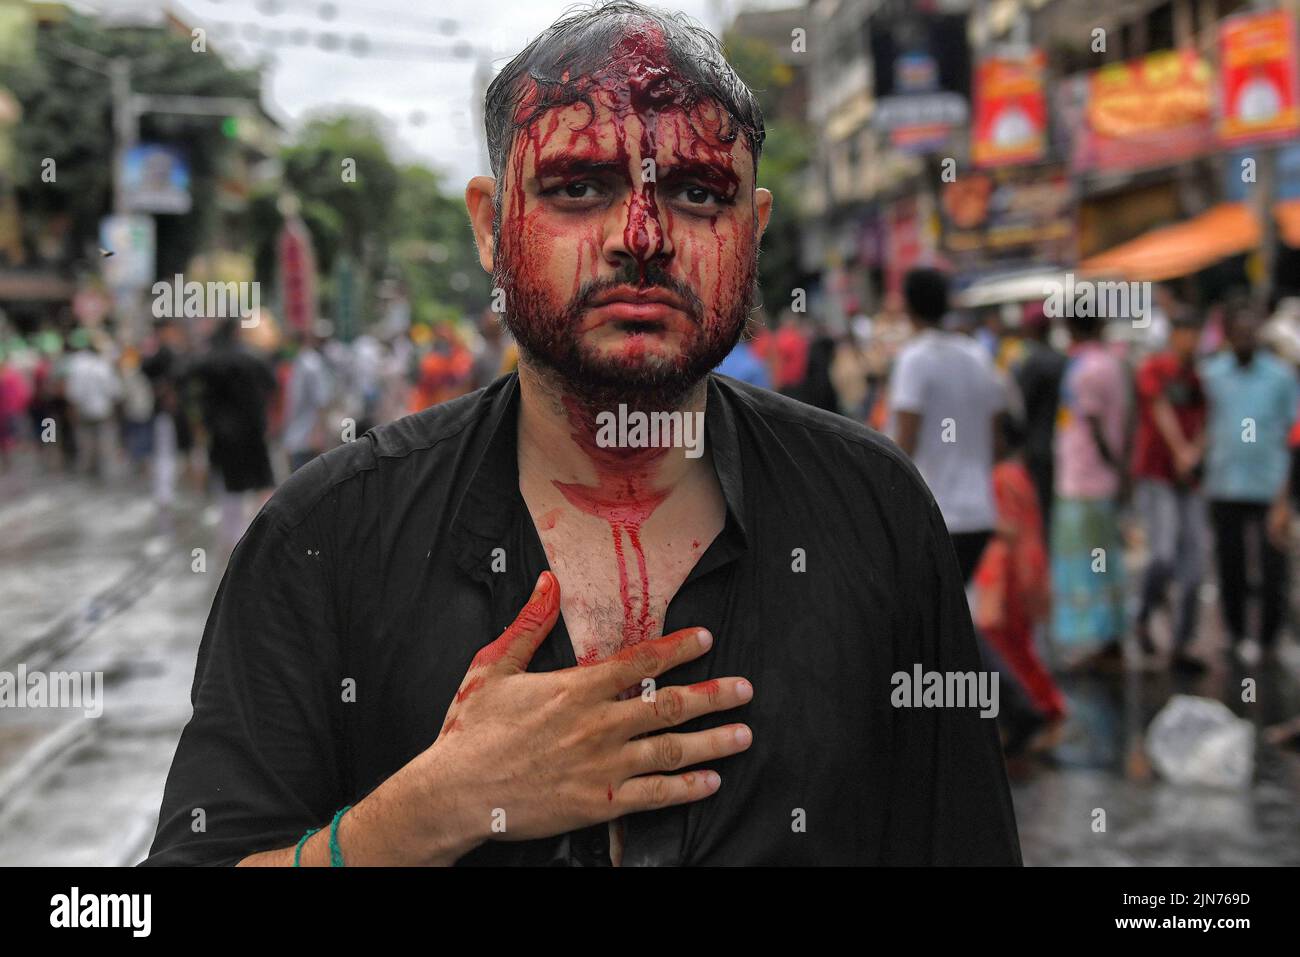 (EDITORS NOTE: Image contains graphic content.) A Shia Muslim devotee seen covered in blood after dangerously wounding himself with blades while showing his grief during the Muharram procession of Kolkata. Muharram is the first month of the Islamic calendar & Ashura is the tenth day of the month of Muharram on which the commemoration of the martyrdom of Imam Hussain, the grandson of Prophet Muhammad (PBUH), during the battle of Karbala, is done. It is part of Mourning for Shia Muslims and a day of fasting for Sunni Muslims that is observed all over the World. Stock Photo